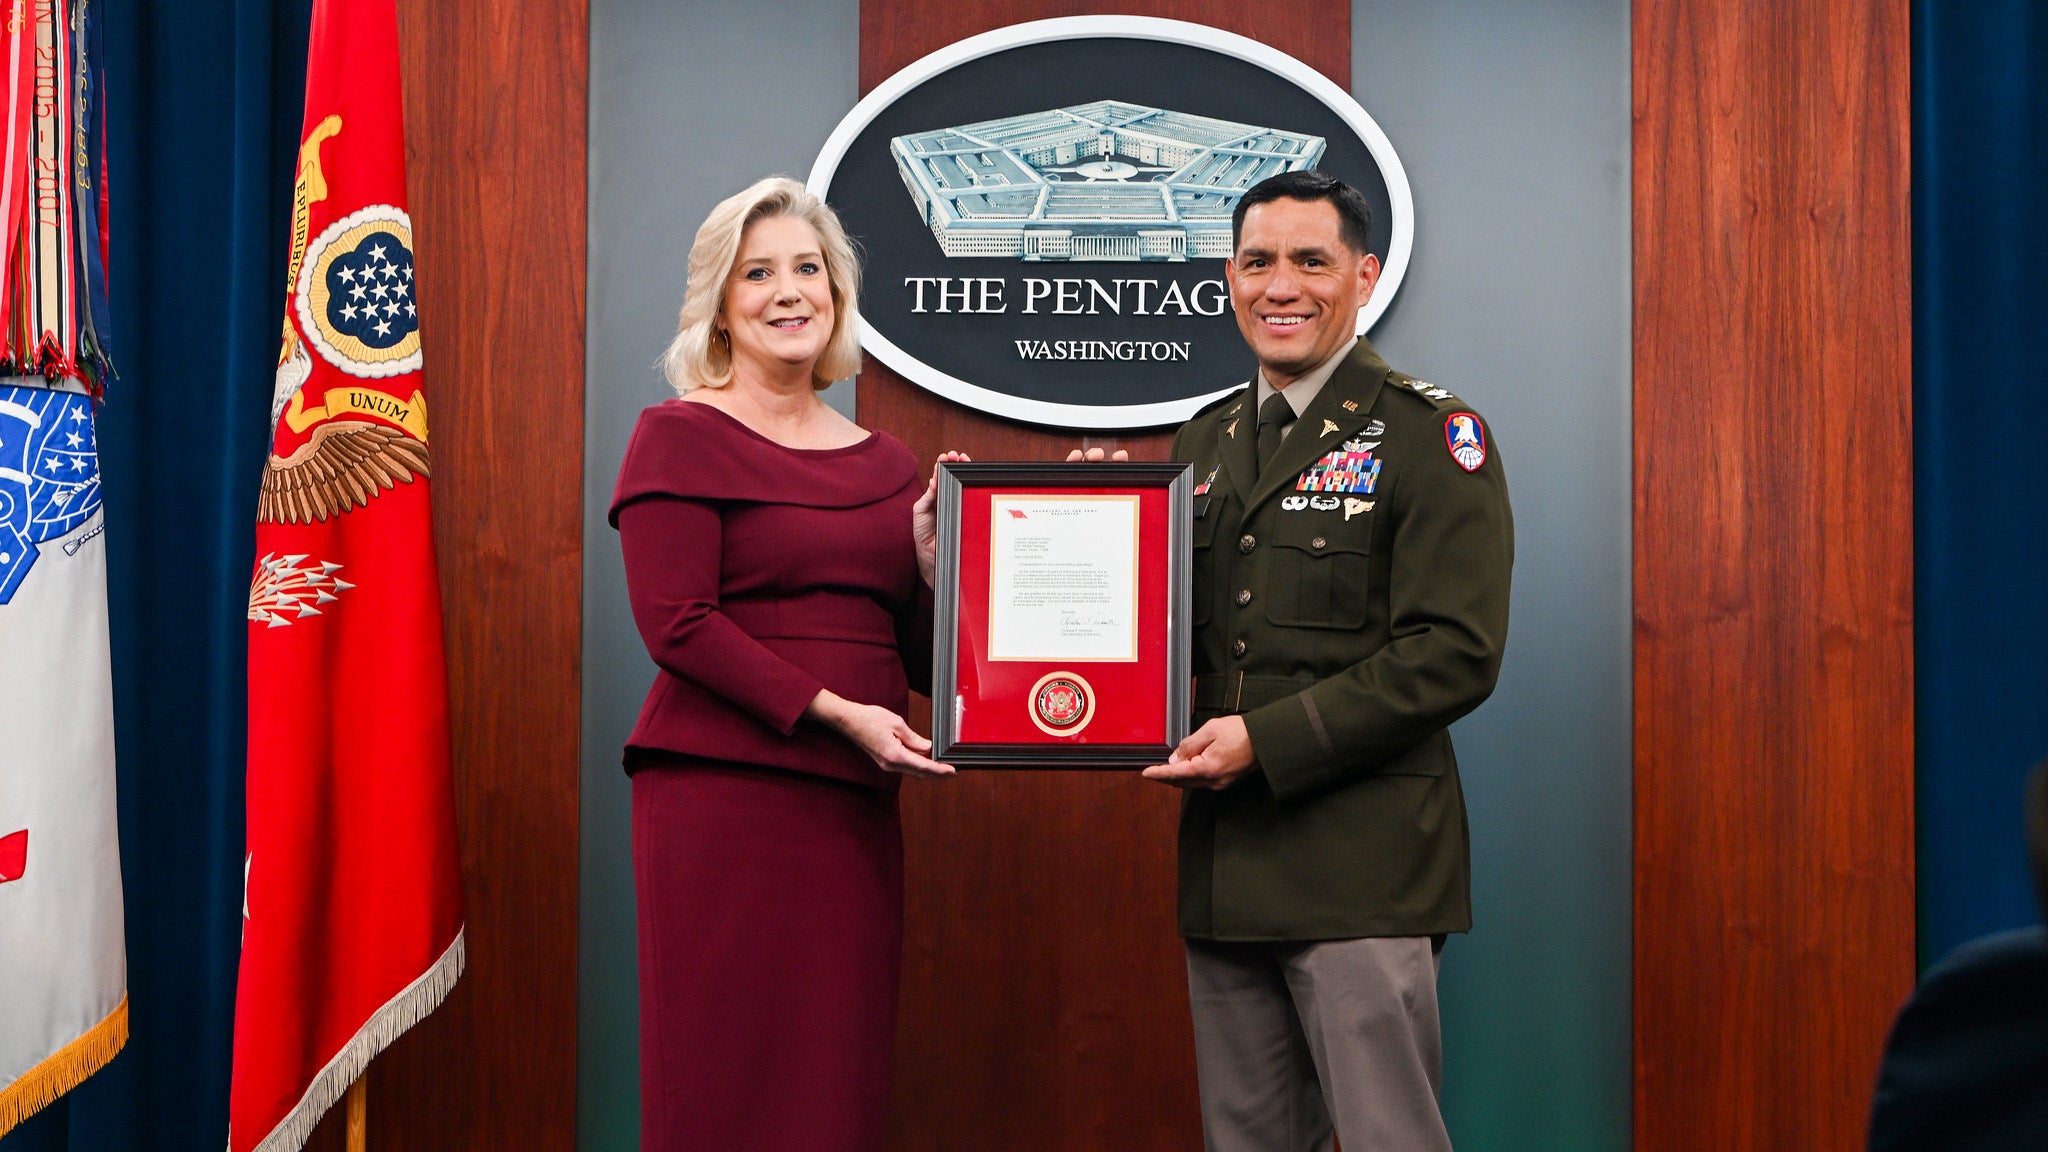 Col. Frank Rubio received the Army Astronaut Device Feb. 22 during a ceremony at the Pentagon, making him one of just three currently serving soldiers authorized to wear the device. 